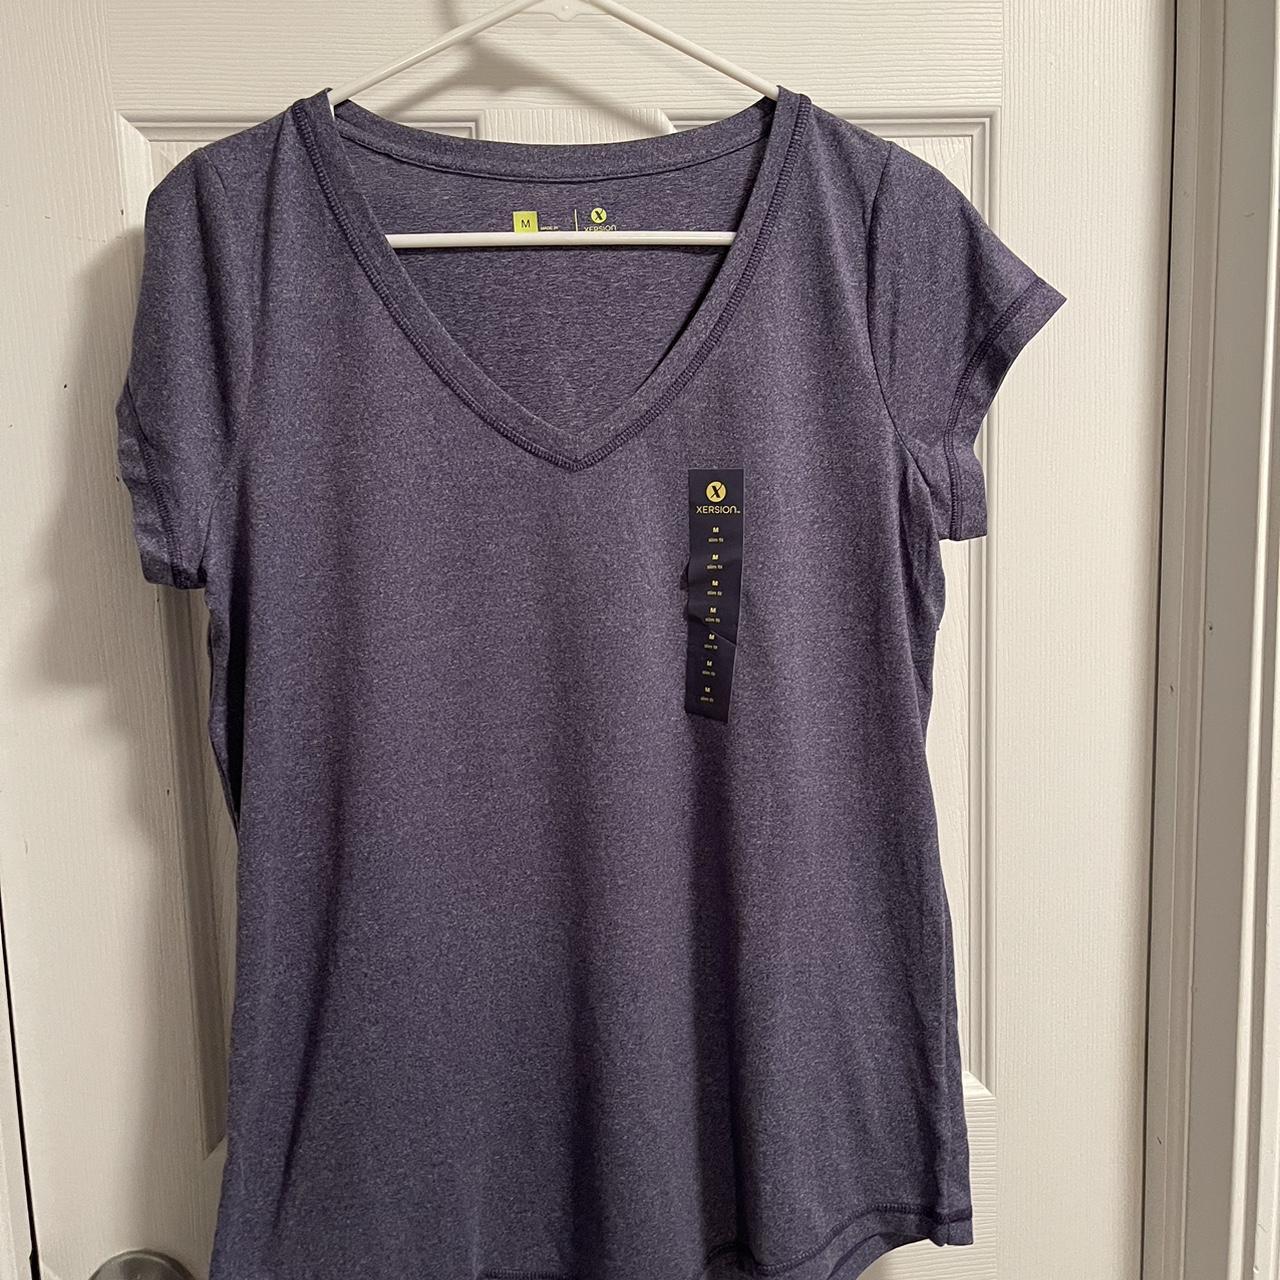 Xersion Scoop-Neck T-Shirts